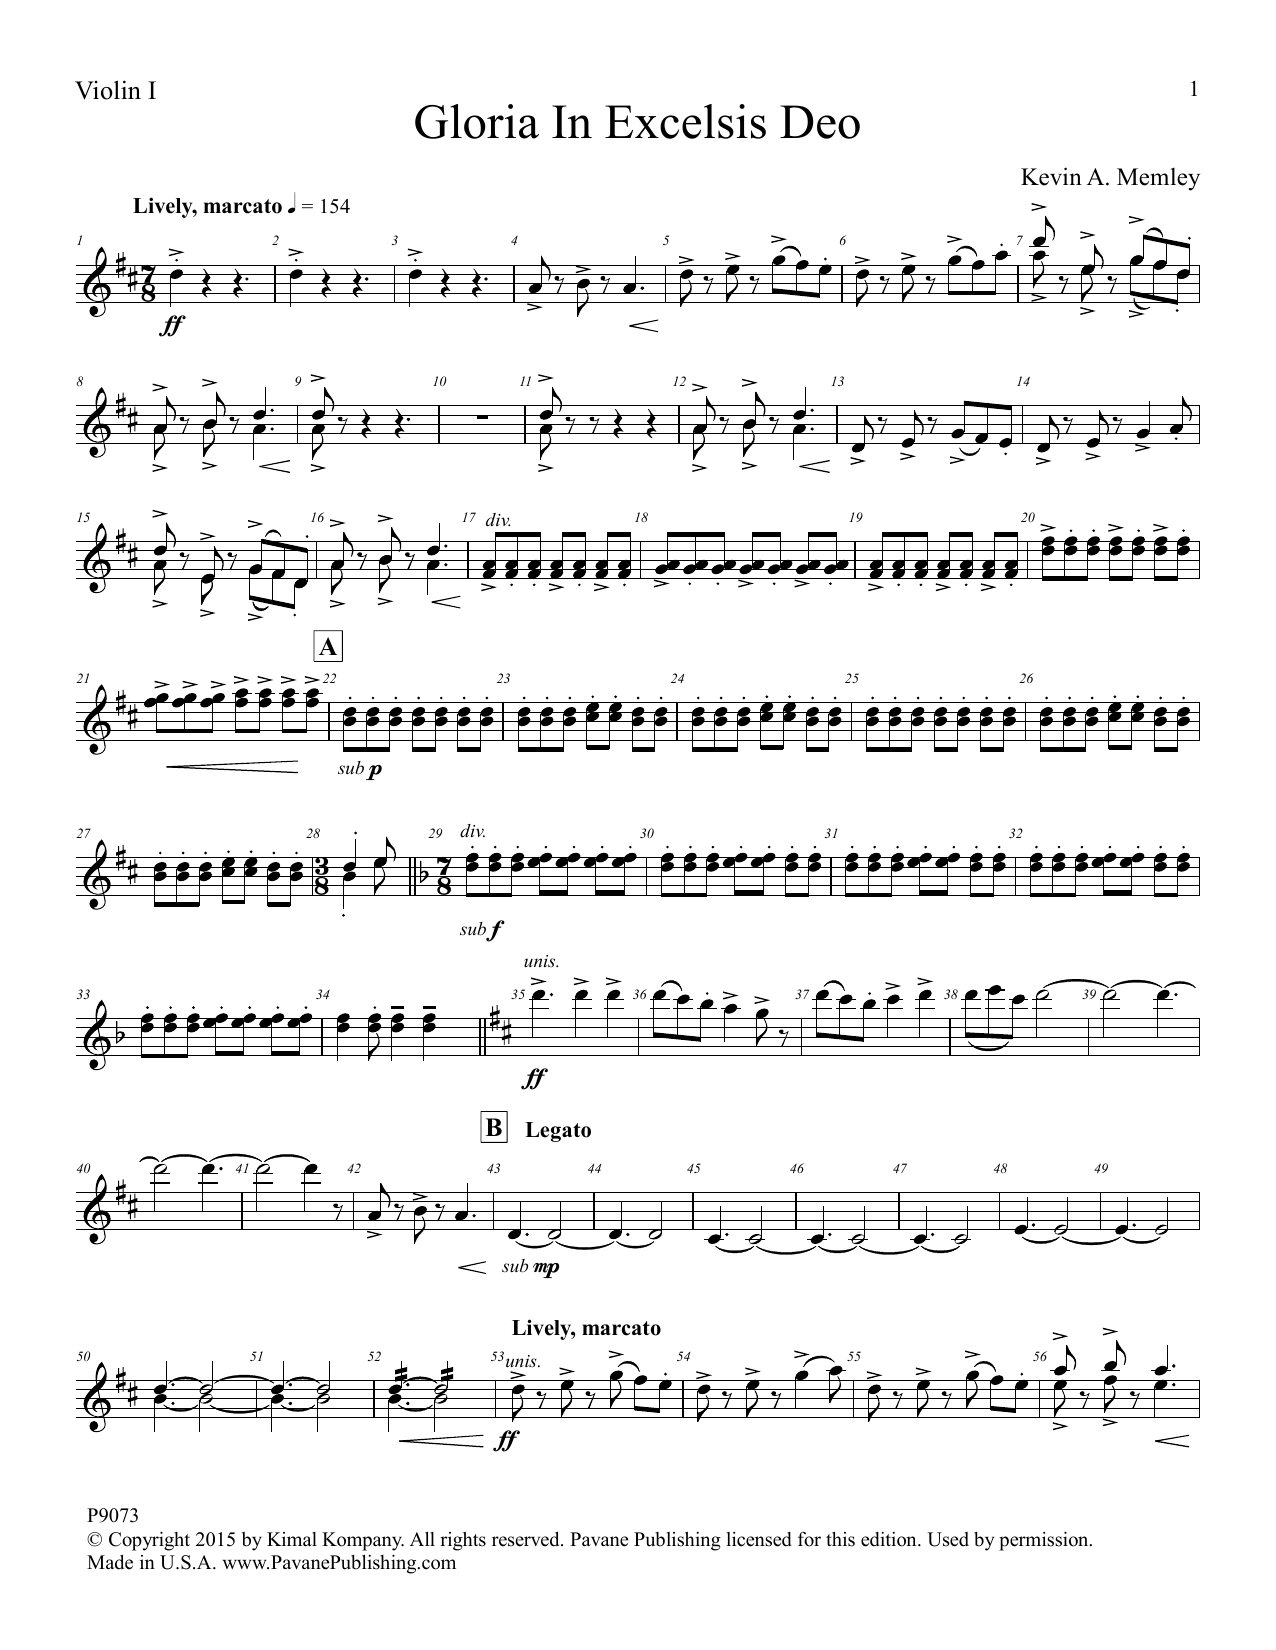 Download Kevin A. Memley Gloria in Excelsis Deo - Violin 1 Sheet Music